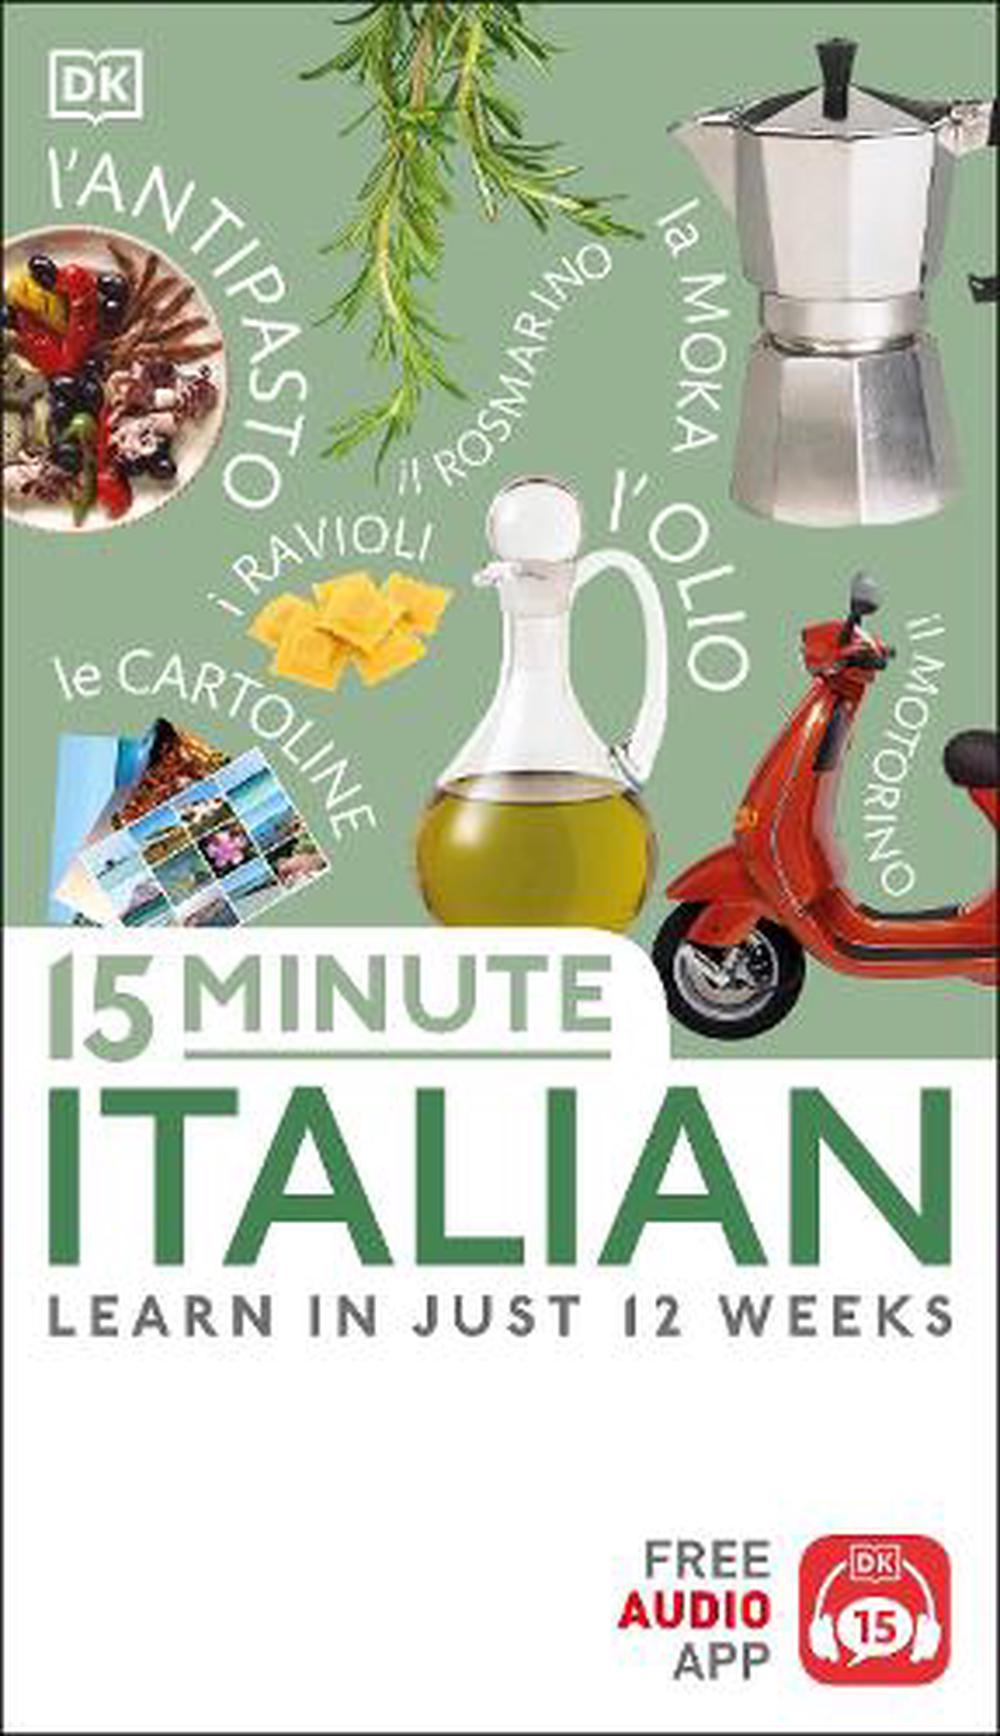 15 Minute Italian by Dk, Paperback, 9780241327388 | Buy online at The Nile